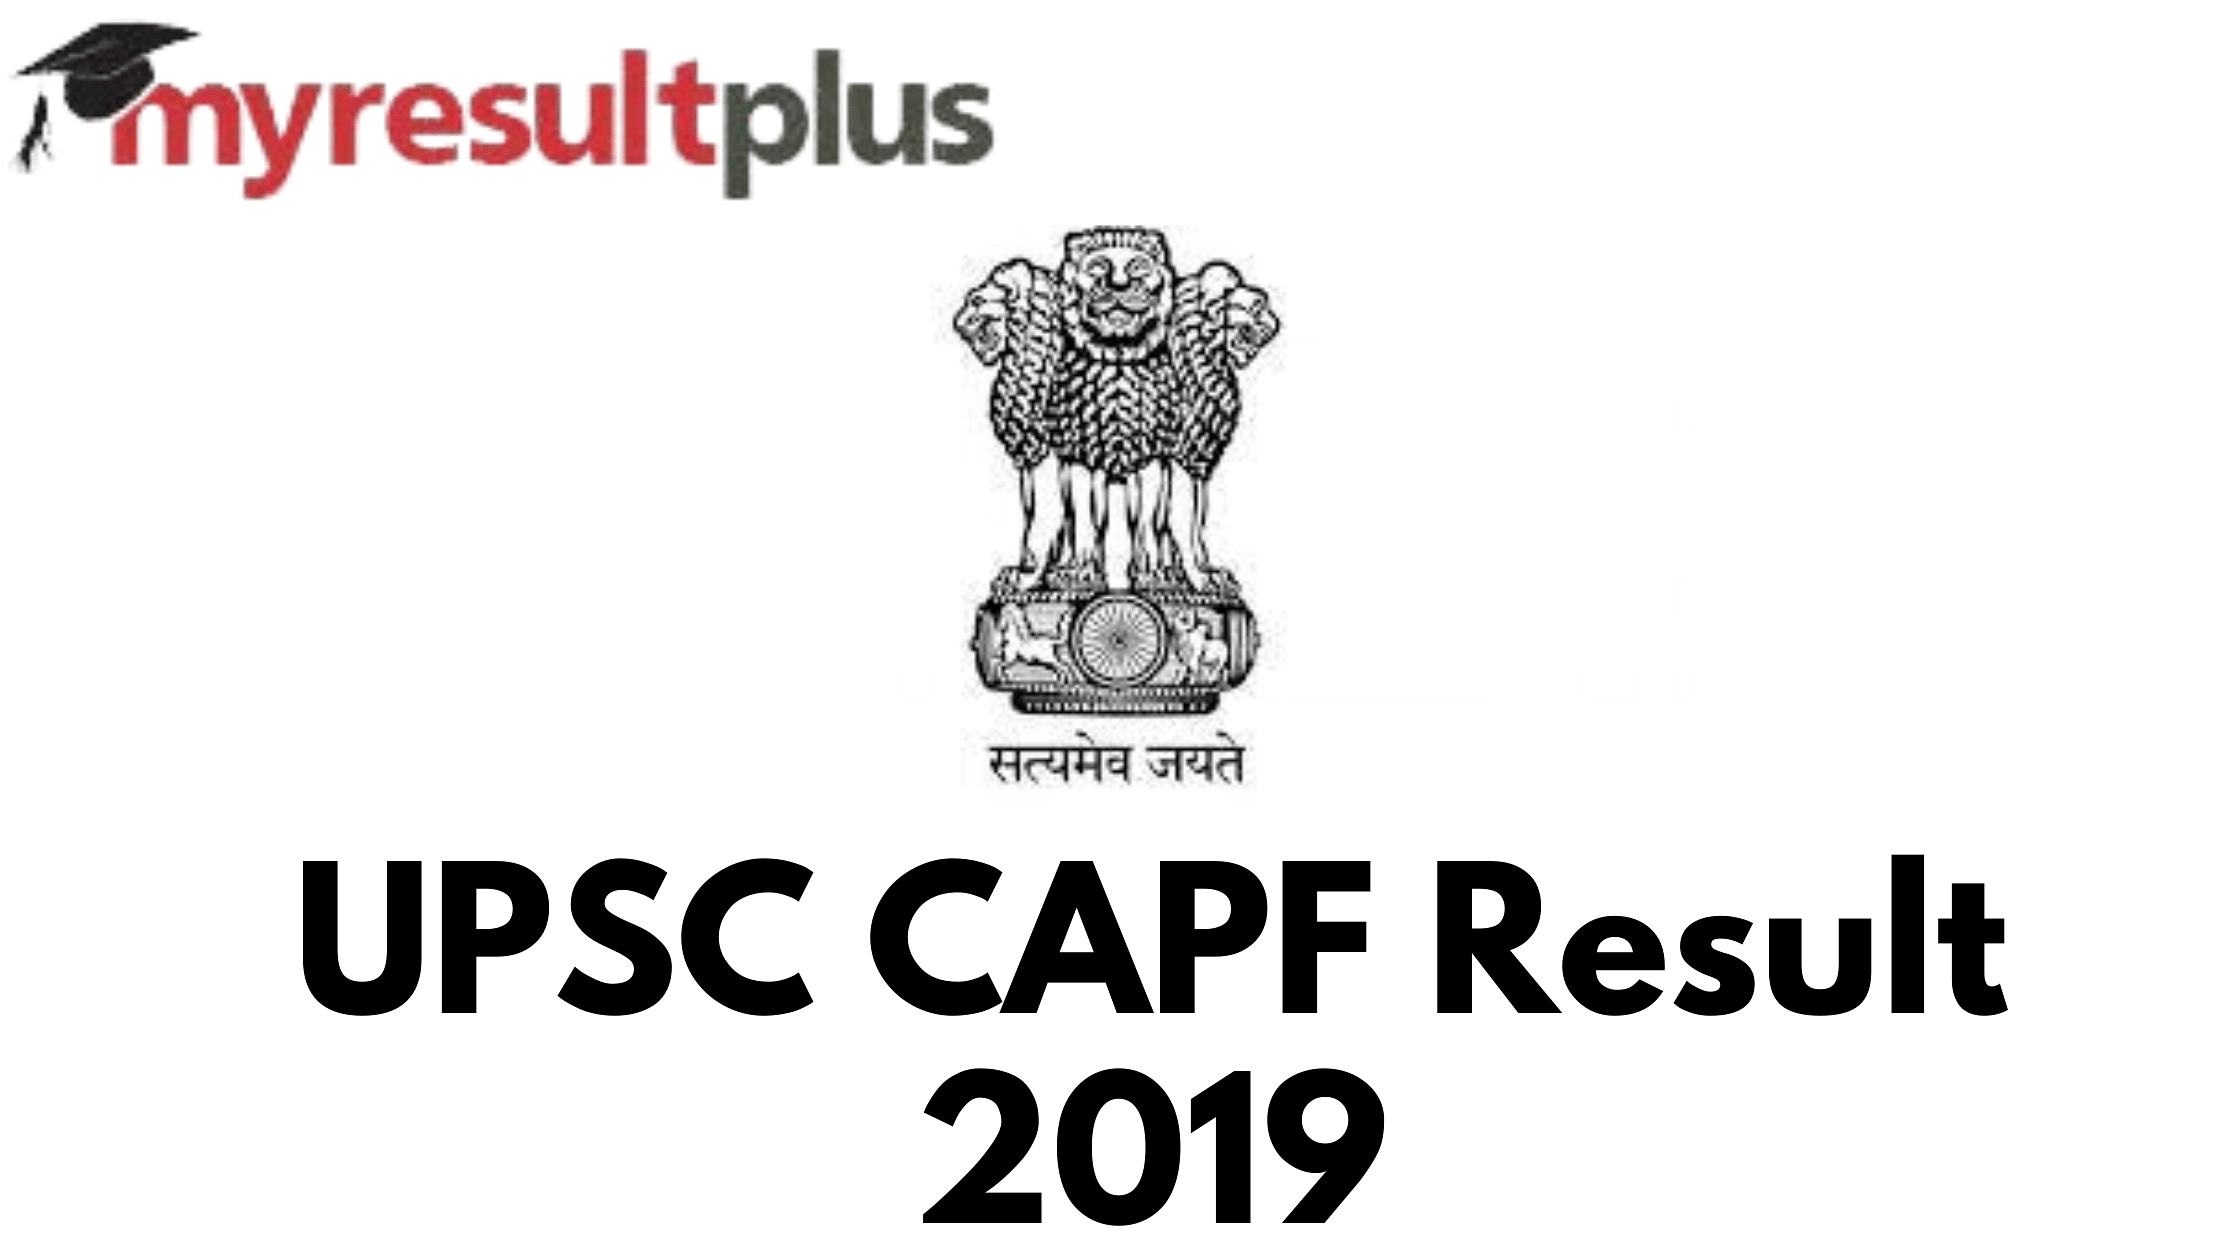 UPSC CAPF Result 2019 Announced, Direct Link to Check Here